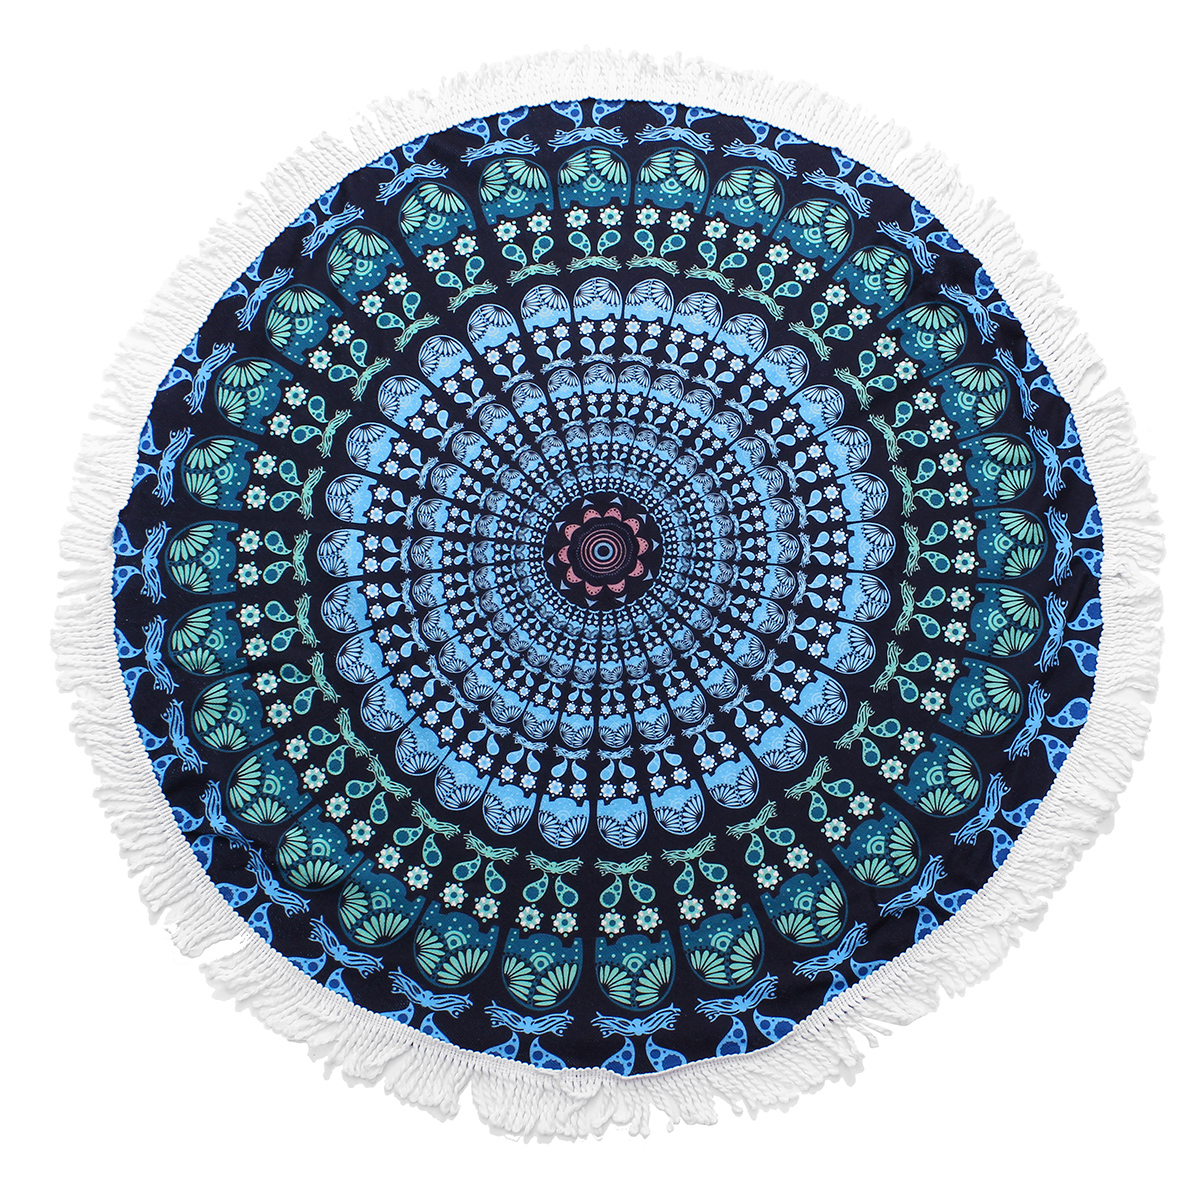 1M15M-Round-Beach-Towel-Tassel-Tapestry-Yoga-Mats-Blankets-Home-Fitness-Decoration-Accessories-1678169-9